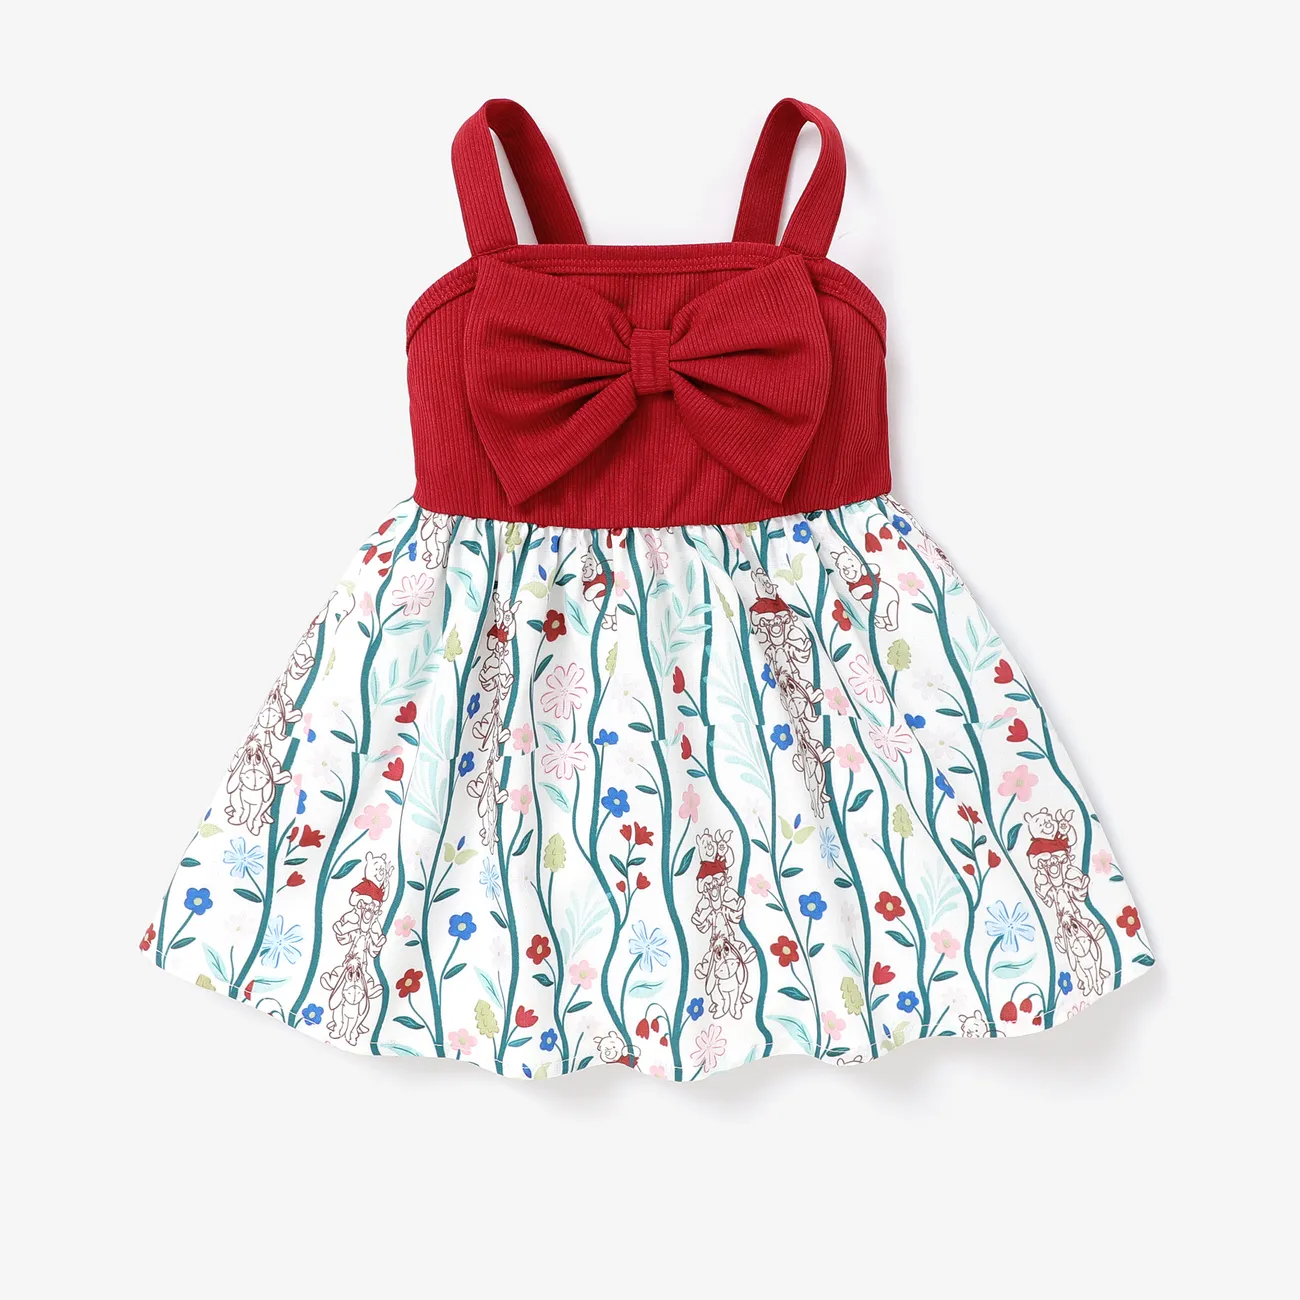 Disney Winnie the Pooh 1pc Baby/Toddler Girl Bowknot Design Plaid/Floral pattern Dress
 Red big image 1